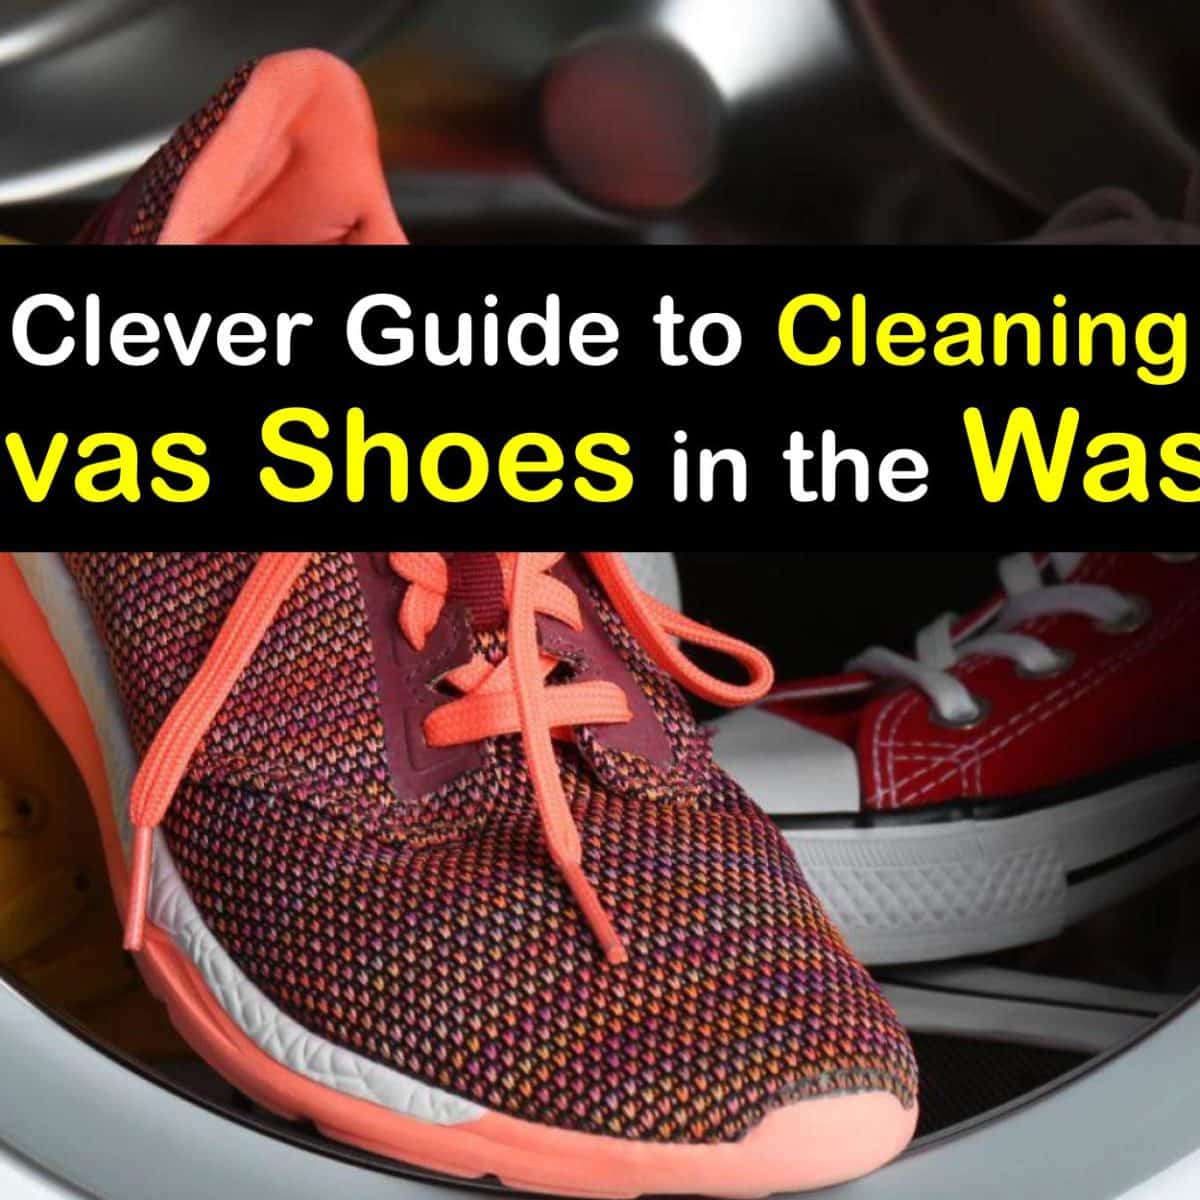 Canvas Shoes in the Washer - Machine Washing Canvas Shoes